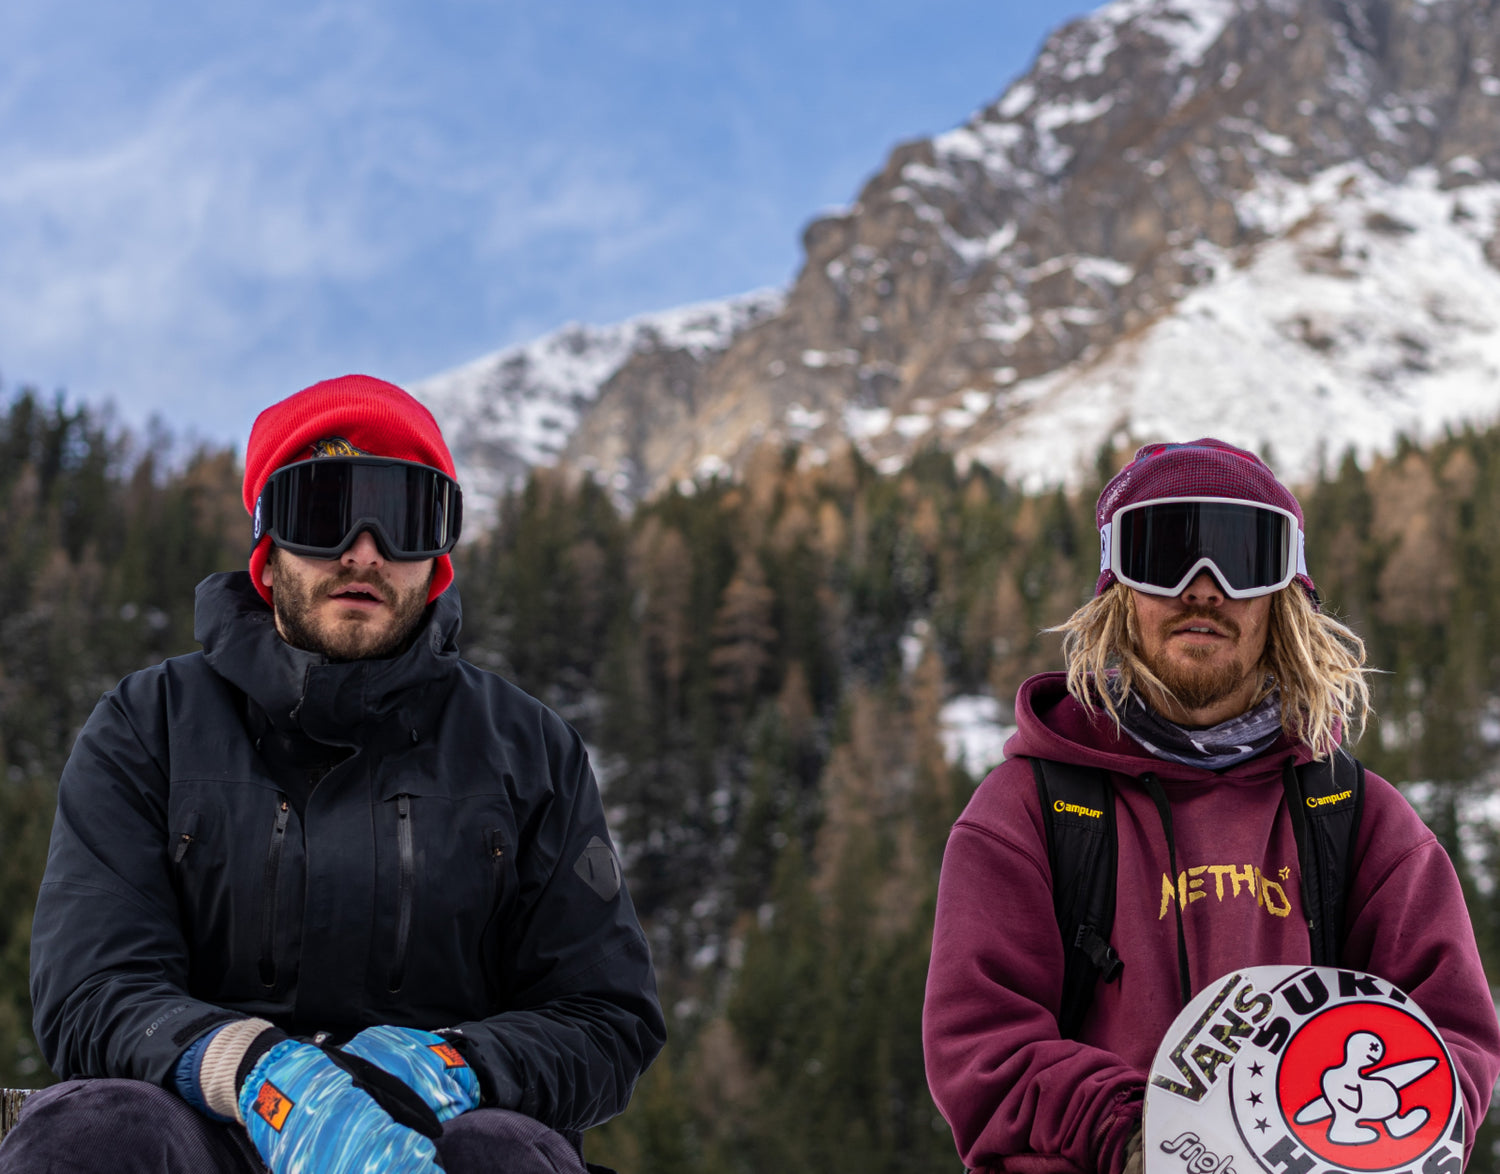 2 mens ambassadors from the bakedsnow snowboard goggles brand sitting in the mountains